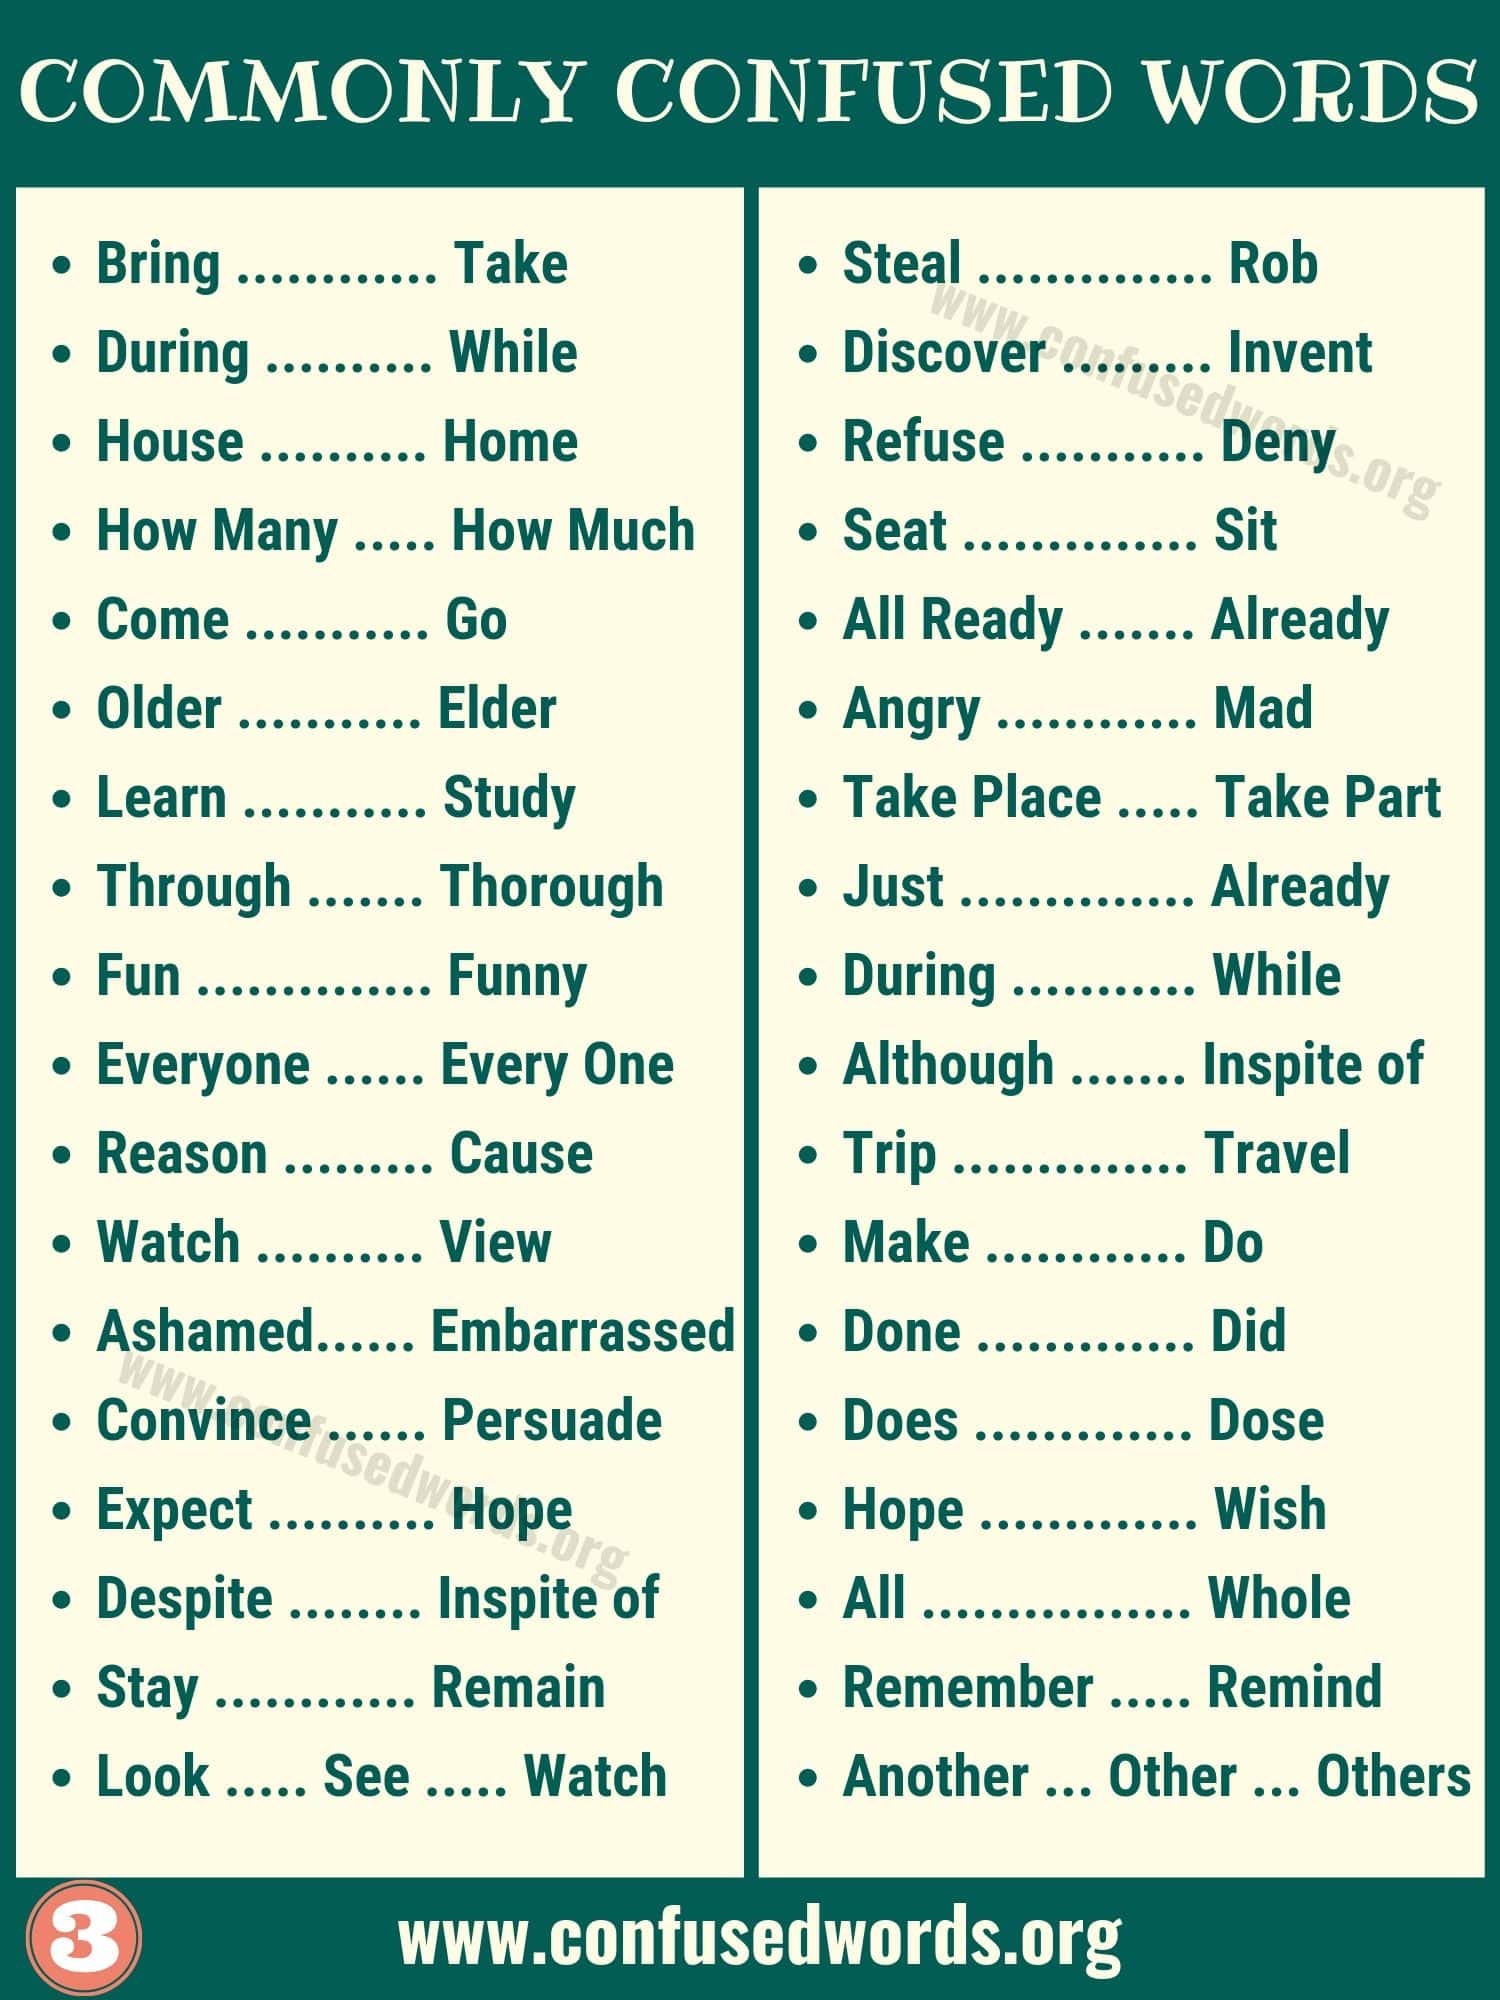 List of Commonly Confused Words